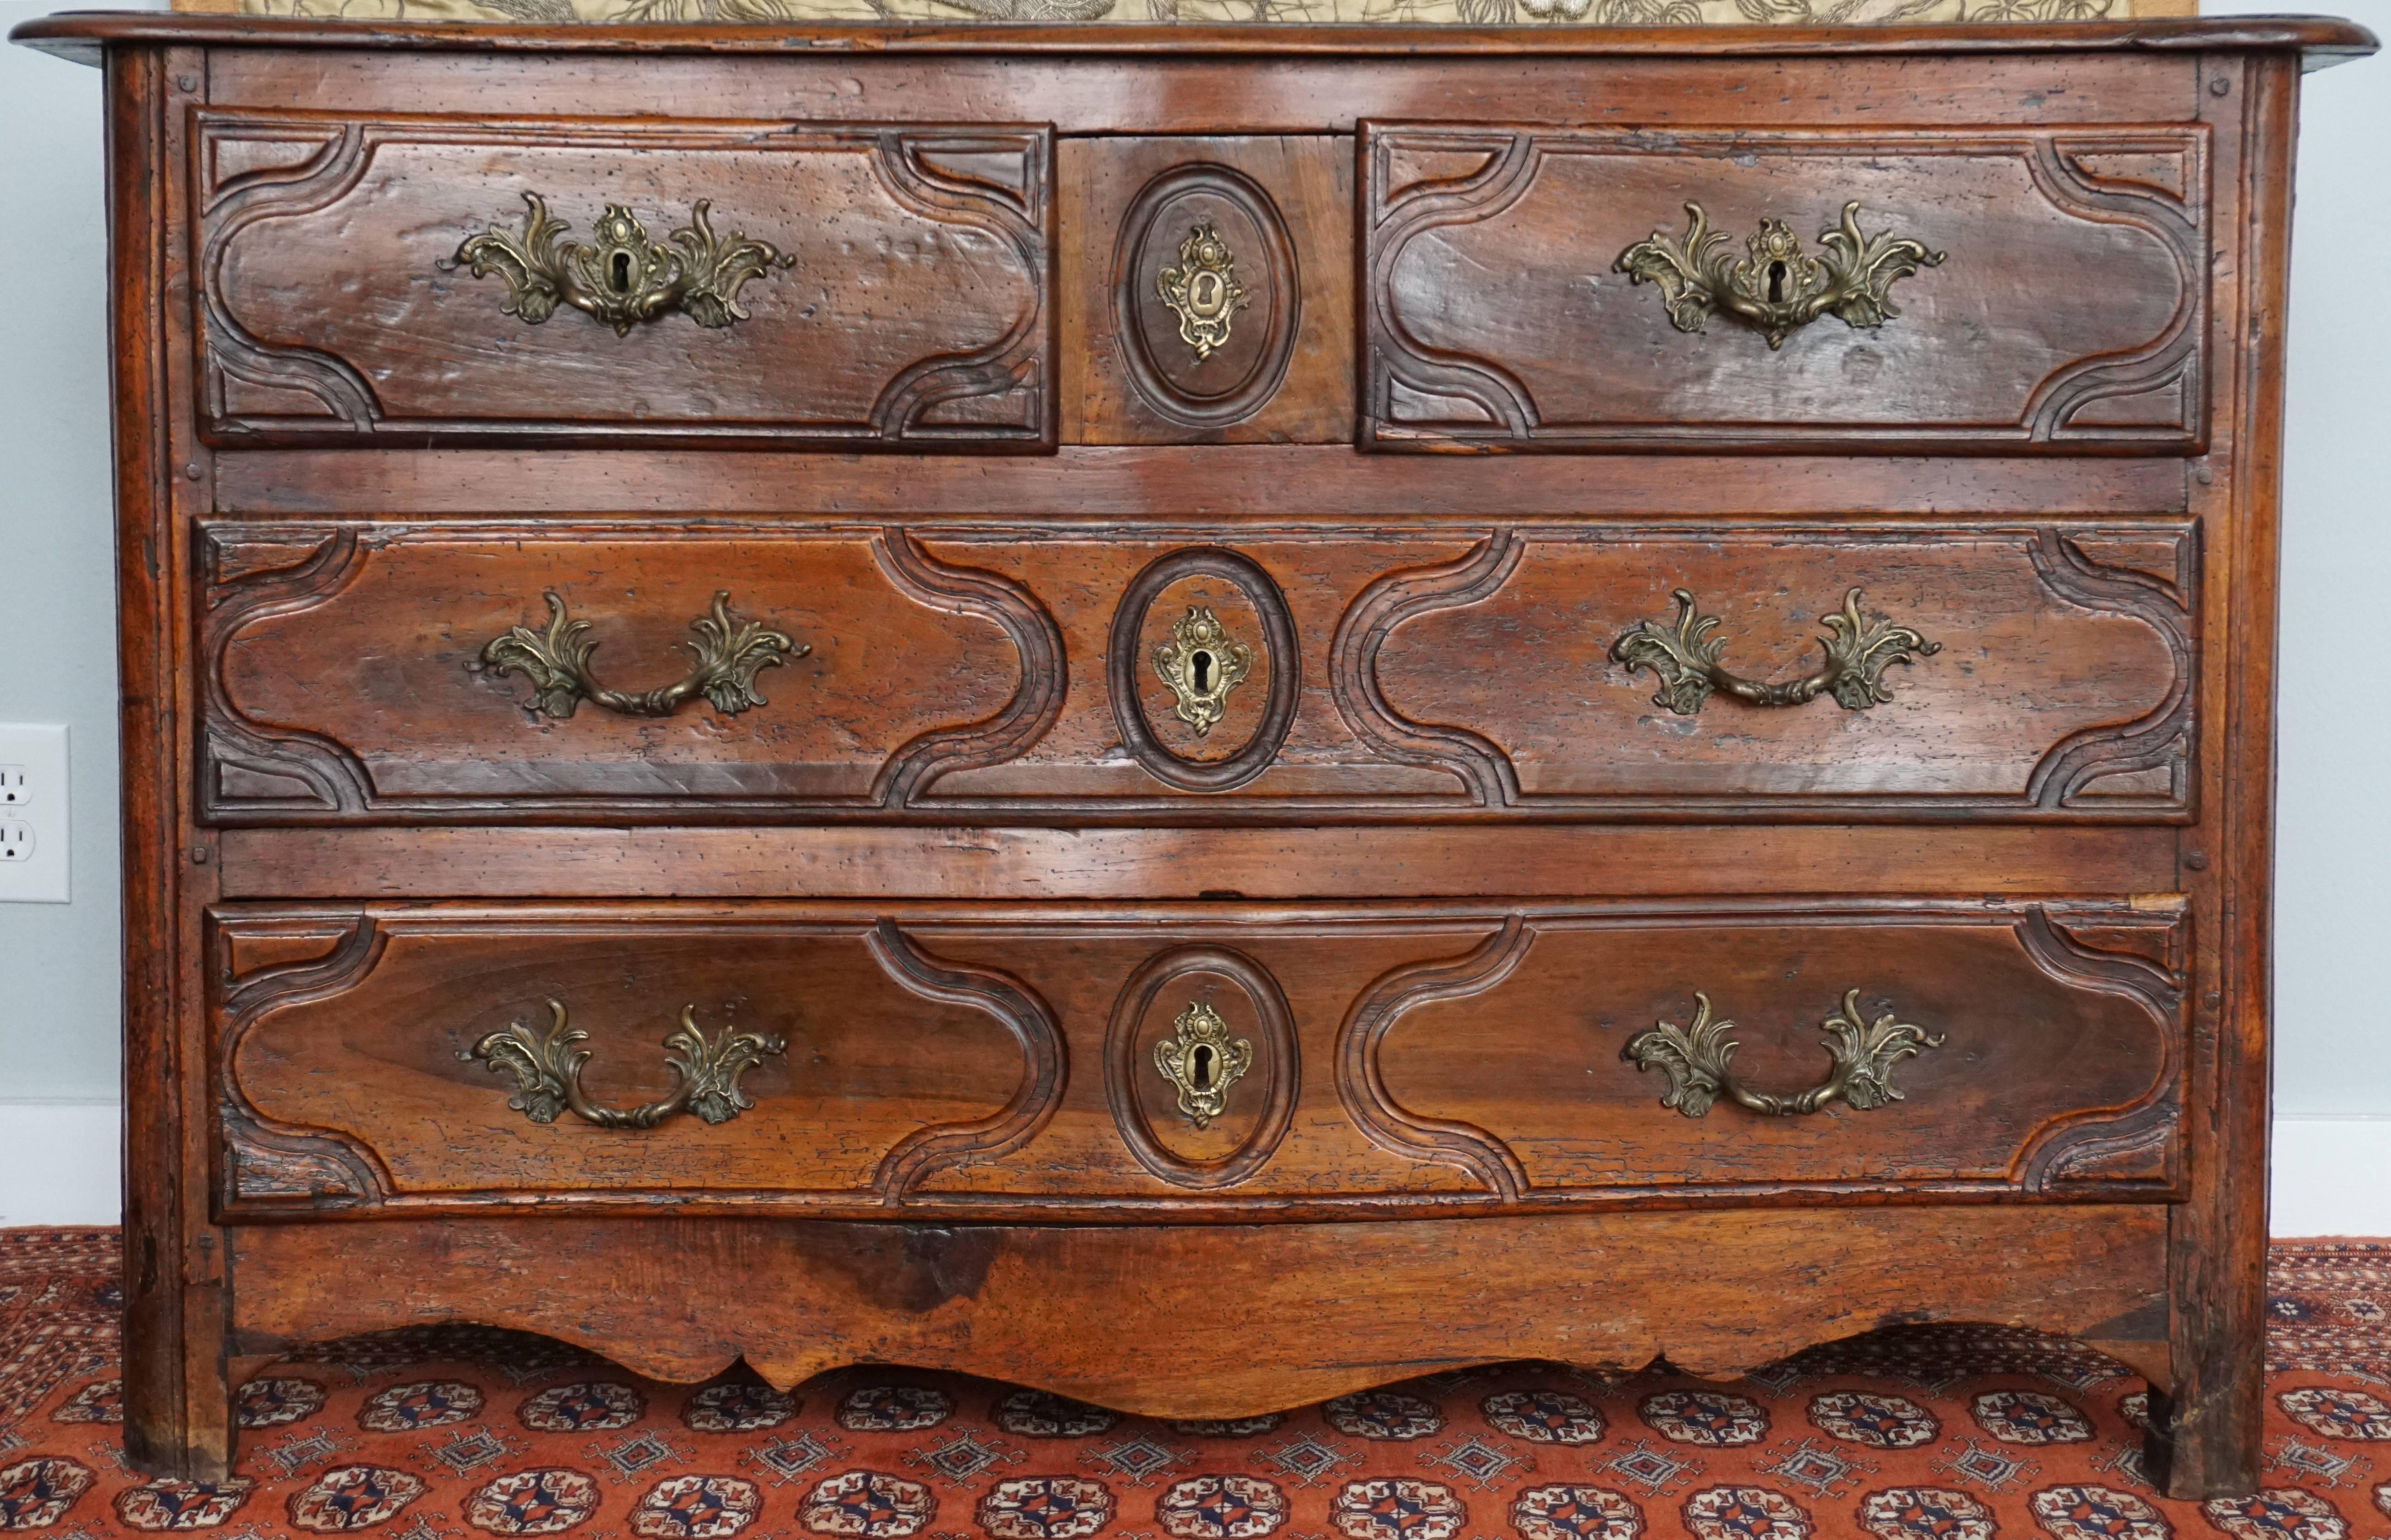 French Louis XV 18th century walnut commode chest.
Serpentine front with two short and one secret drawer over two full width drawers, having original locks and brass hardware.